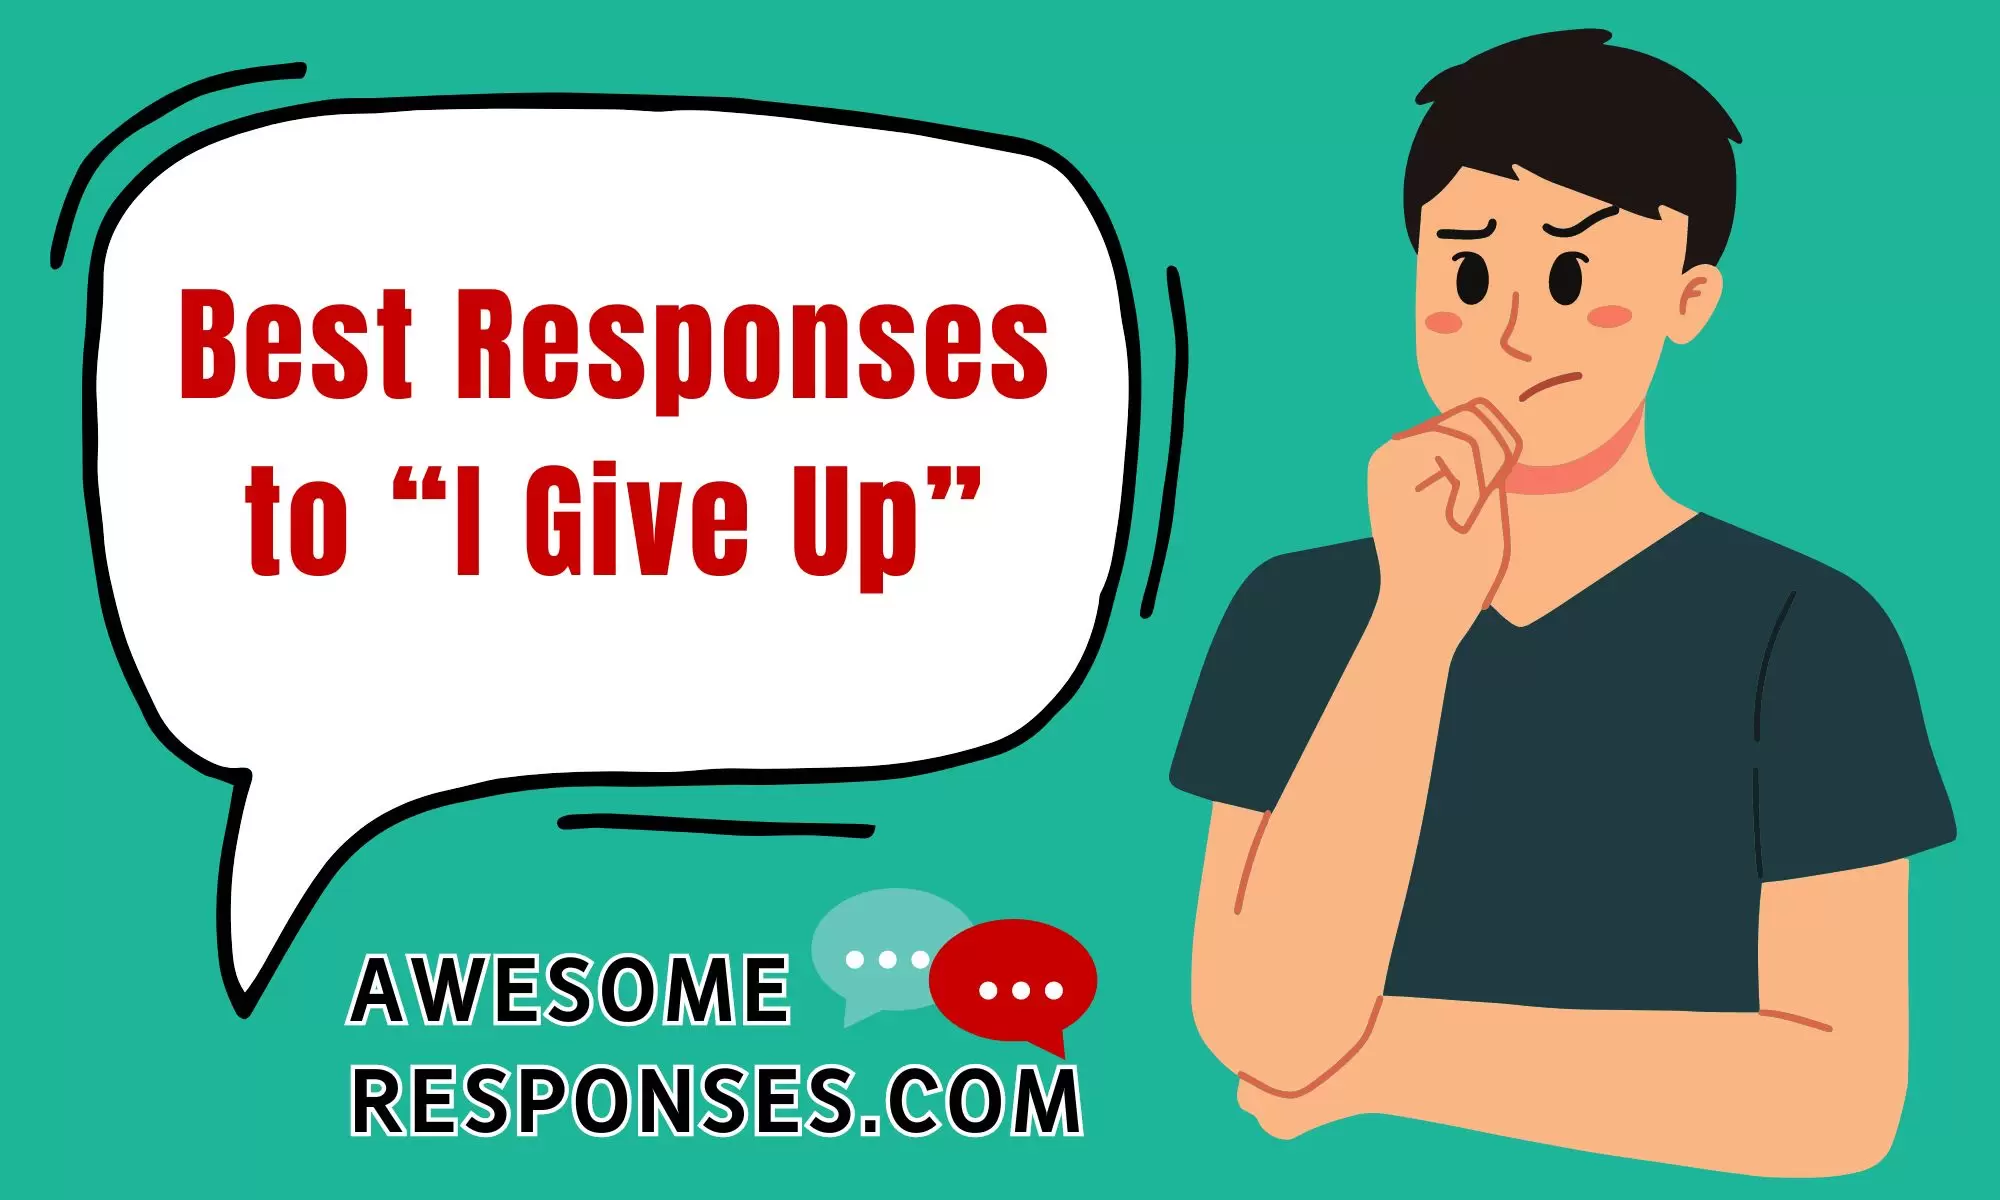 Best Responses to “I Give Up”